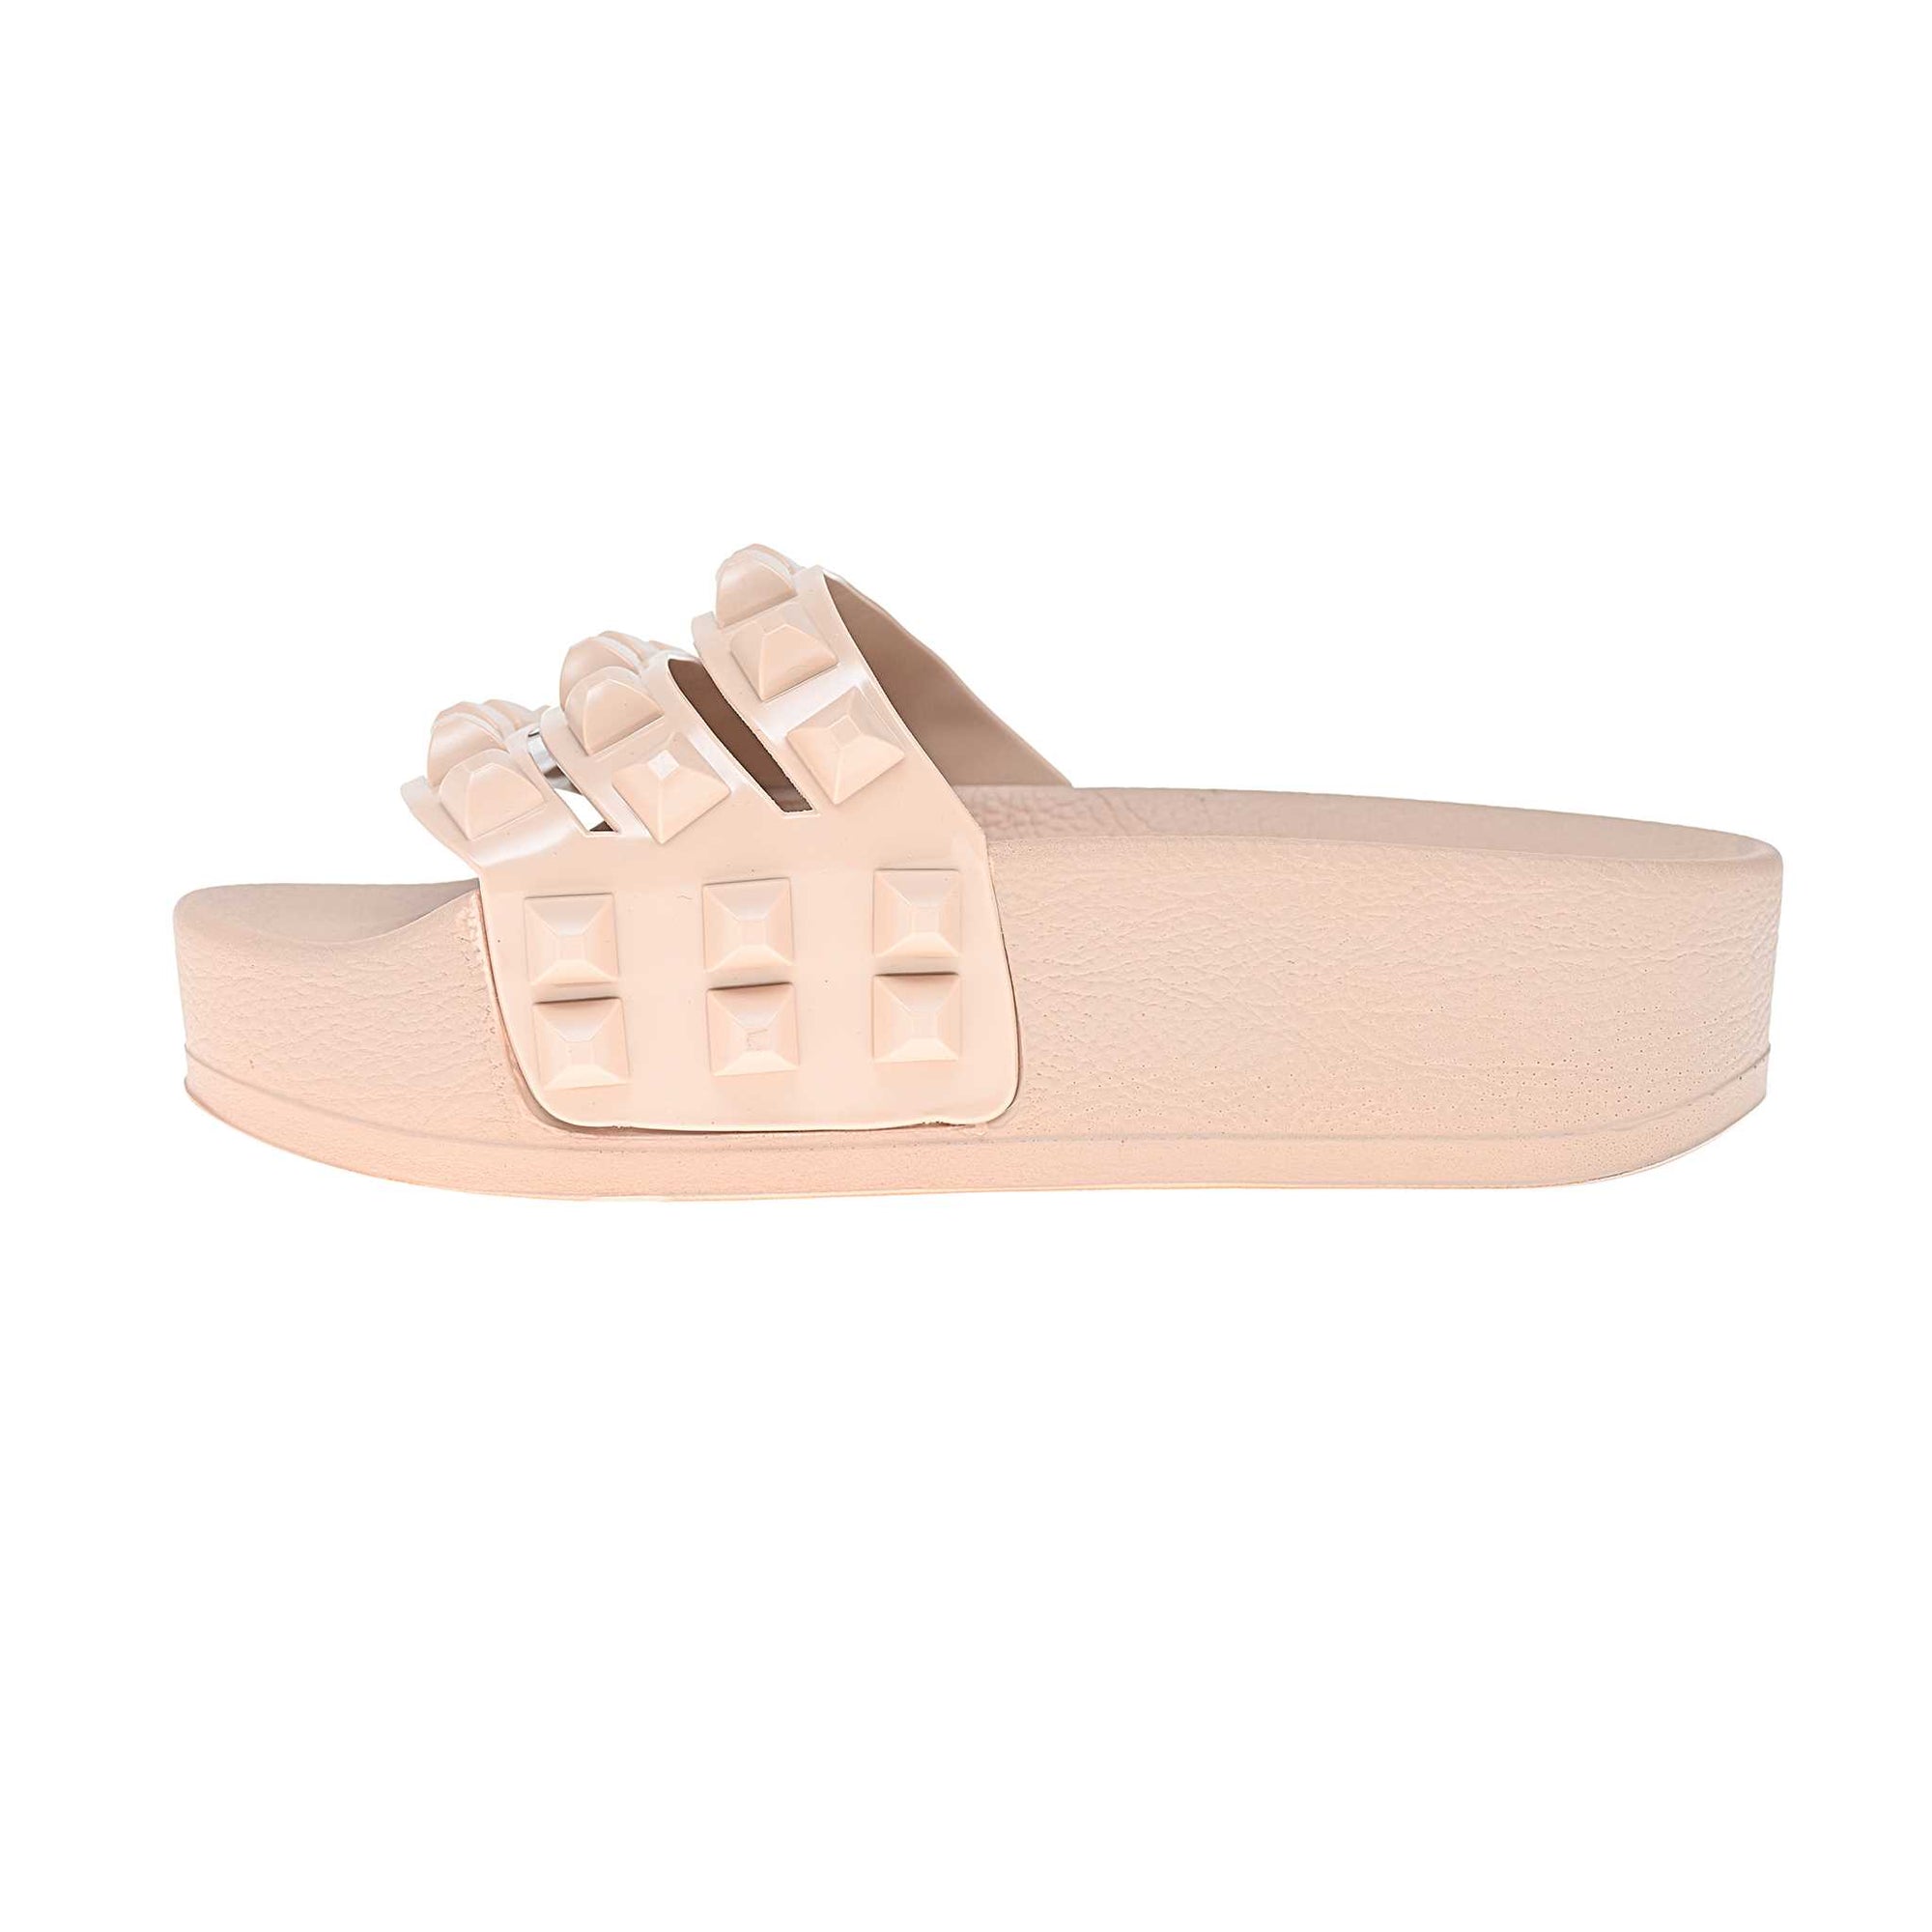 Carmen platform slides sandals, summer slides Comfortable, stylish, and ready for beach or street look from Carmen Sol